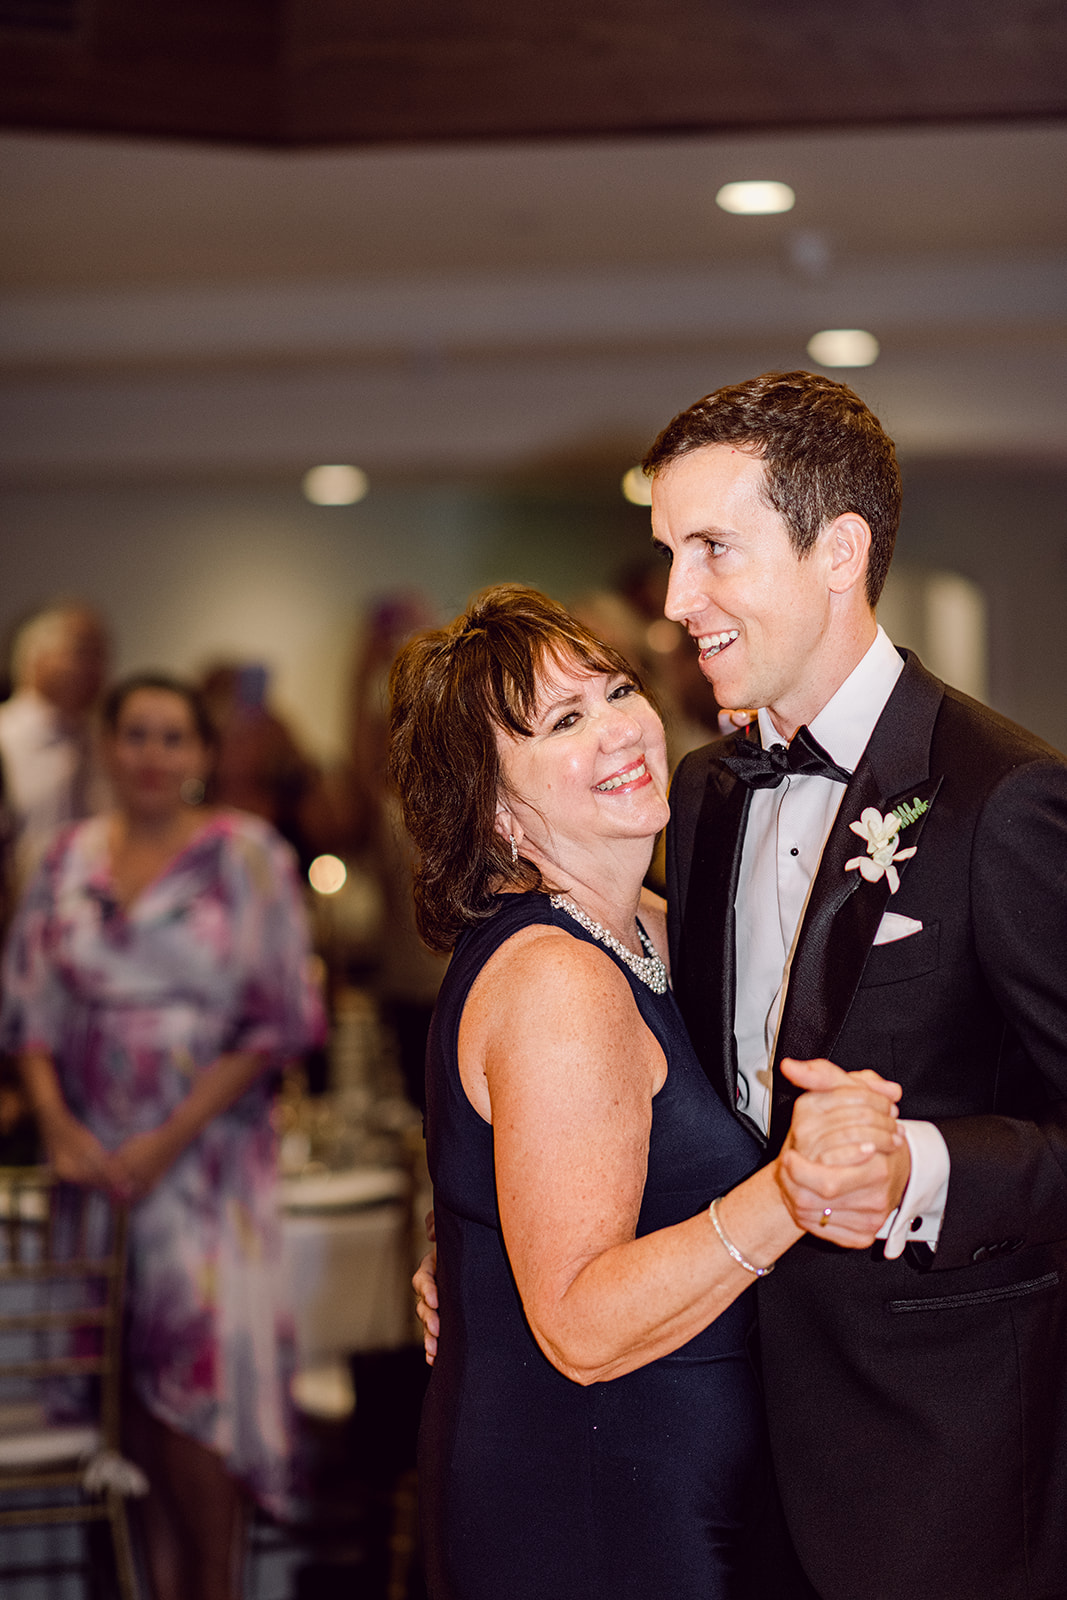 Mother son dance at reception at Mayfair House Hotel & Garden in Miami on wedding day.